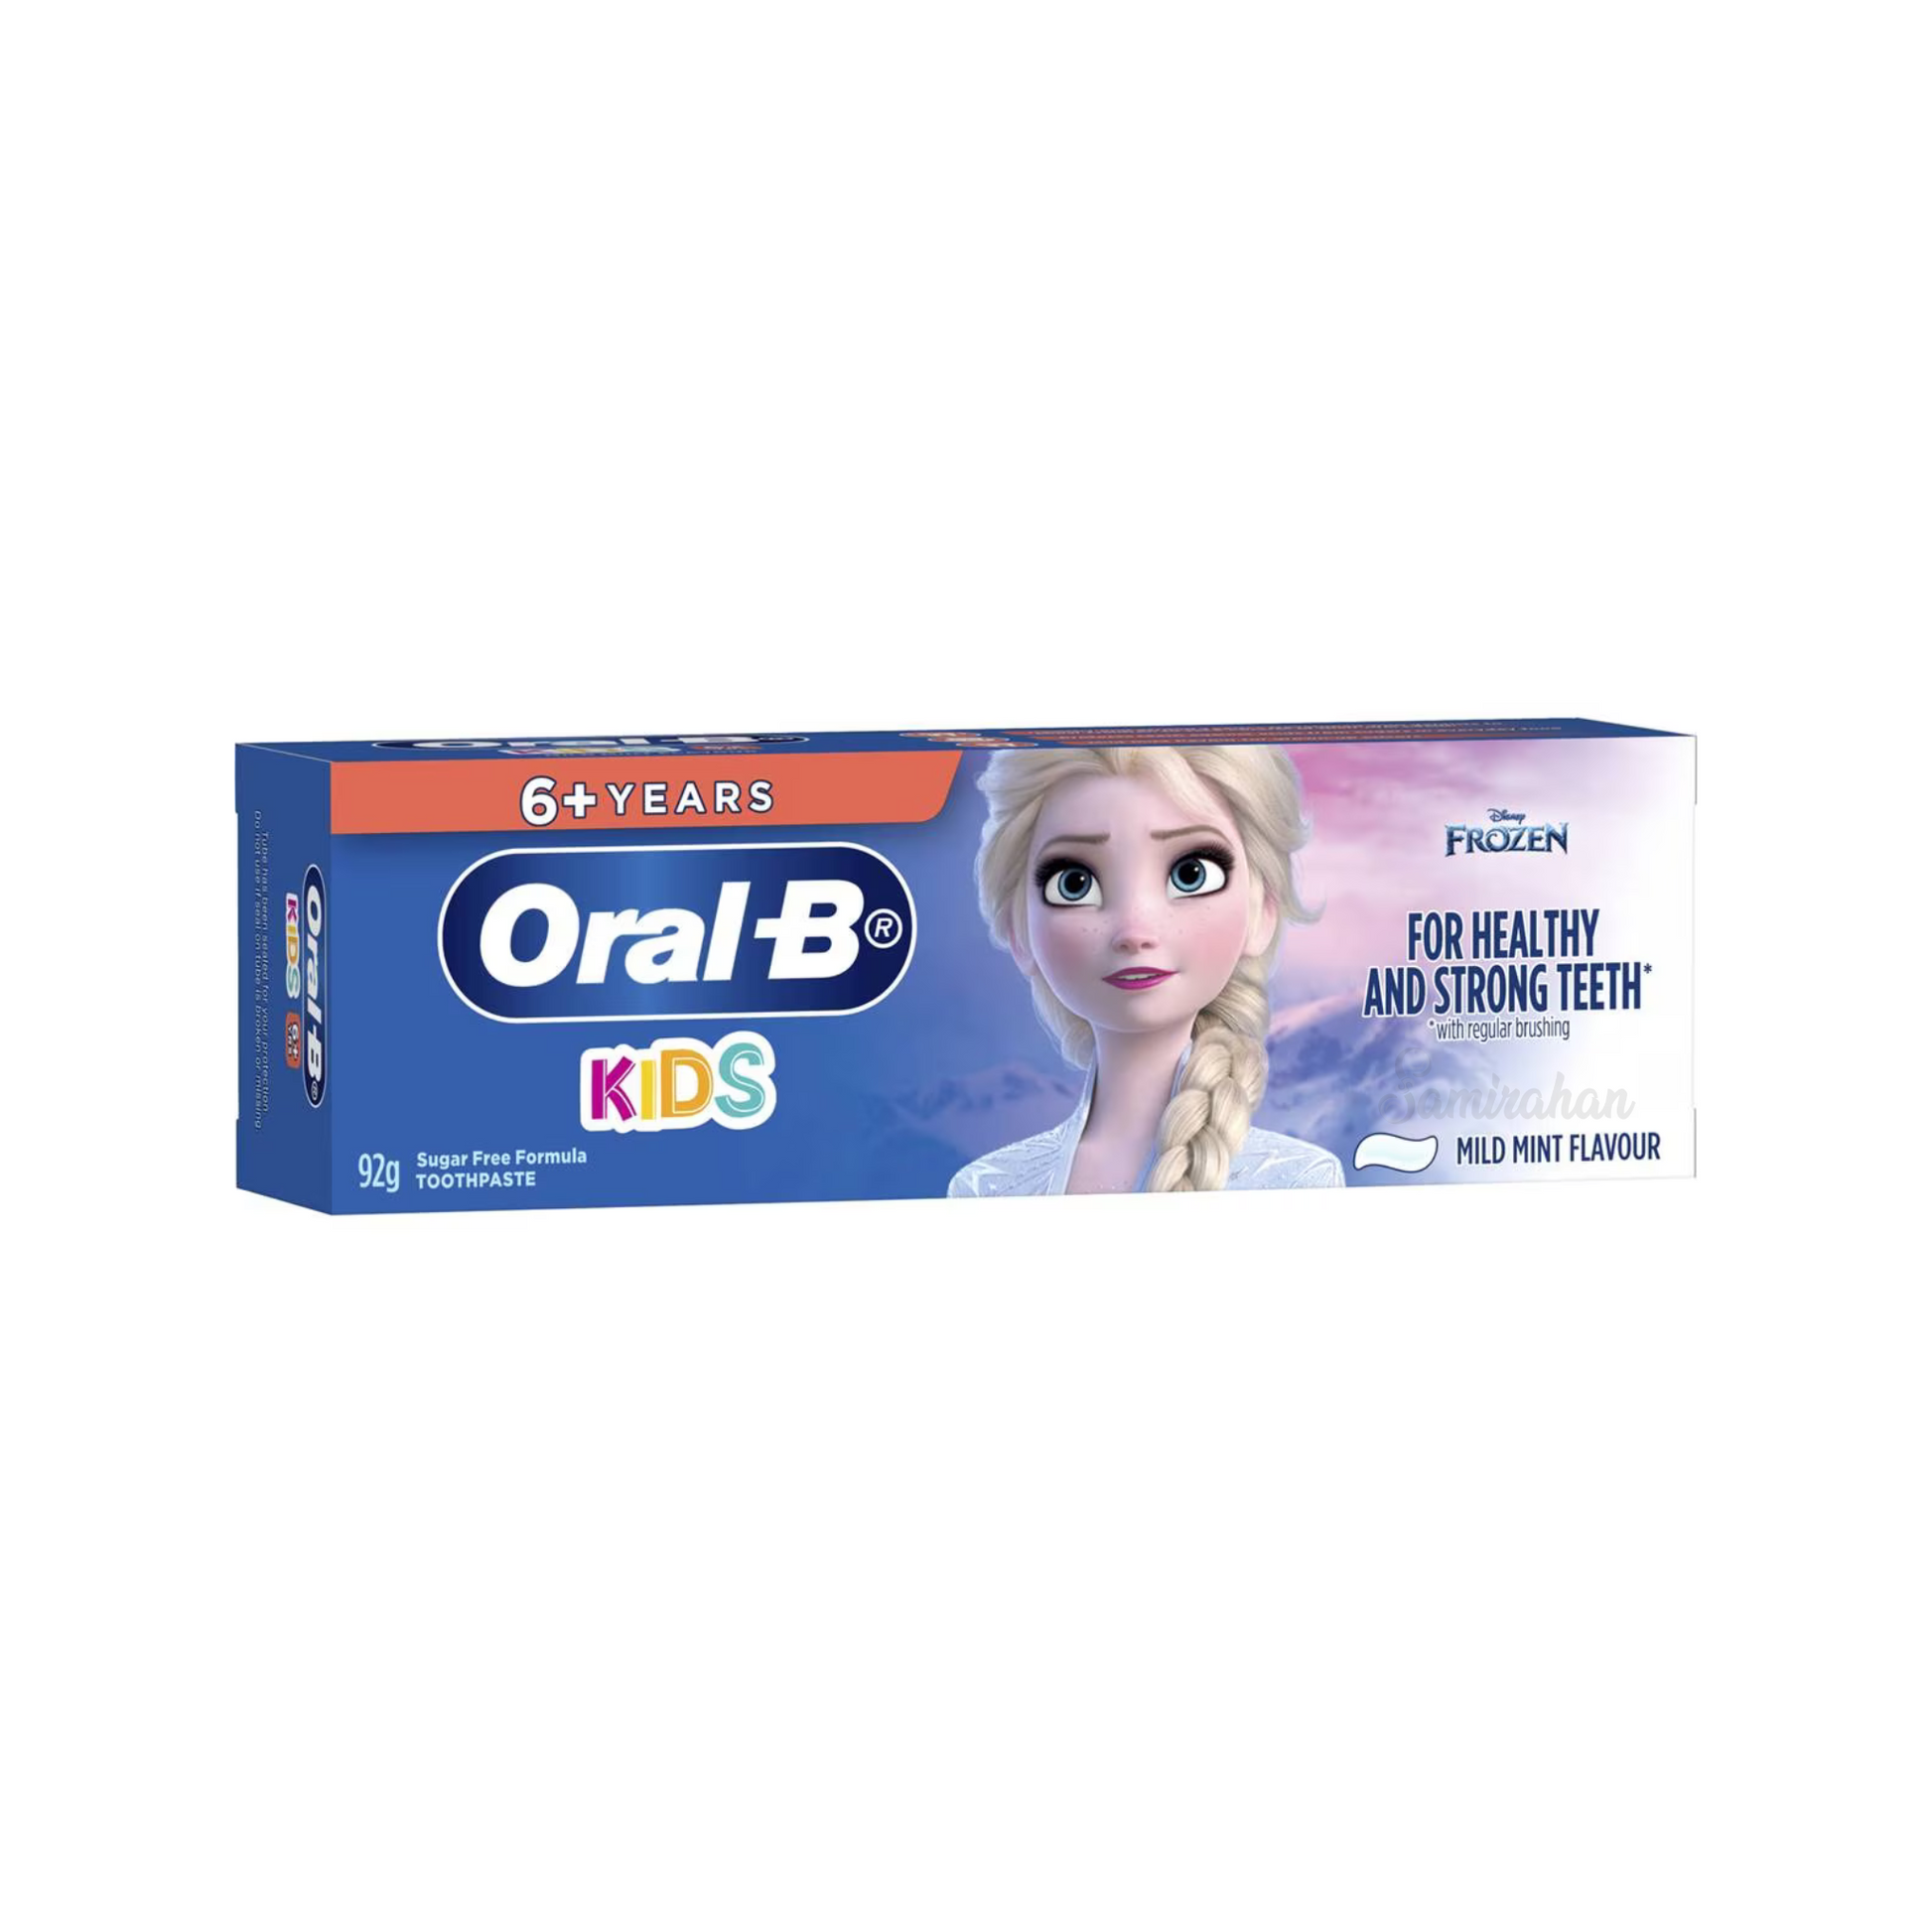 Oral B Kids Toothpaste with sugar shield protects your child's teeth against acids from sugars in everyday food. This sugar free fluoride toothpaste promotes Healthy and Strong Teeth^ in kids. Best genuine authentic imported foreign Australian premium real quality dental children toothpaste price in Dhaka Bangladesh.